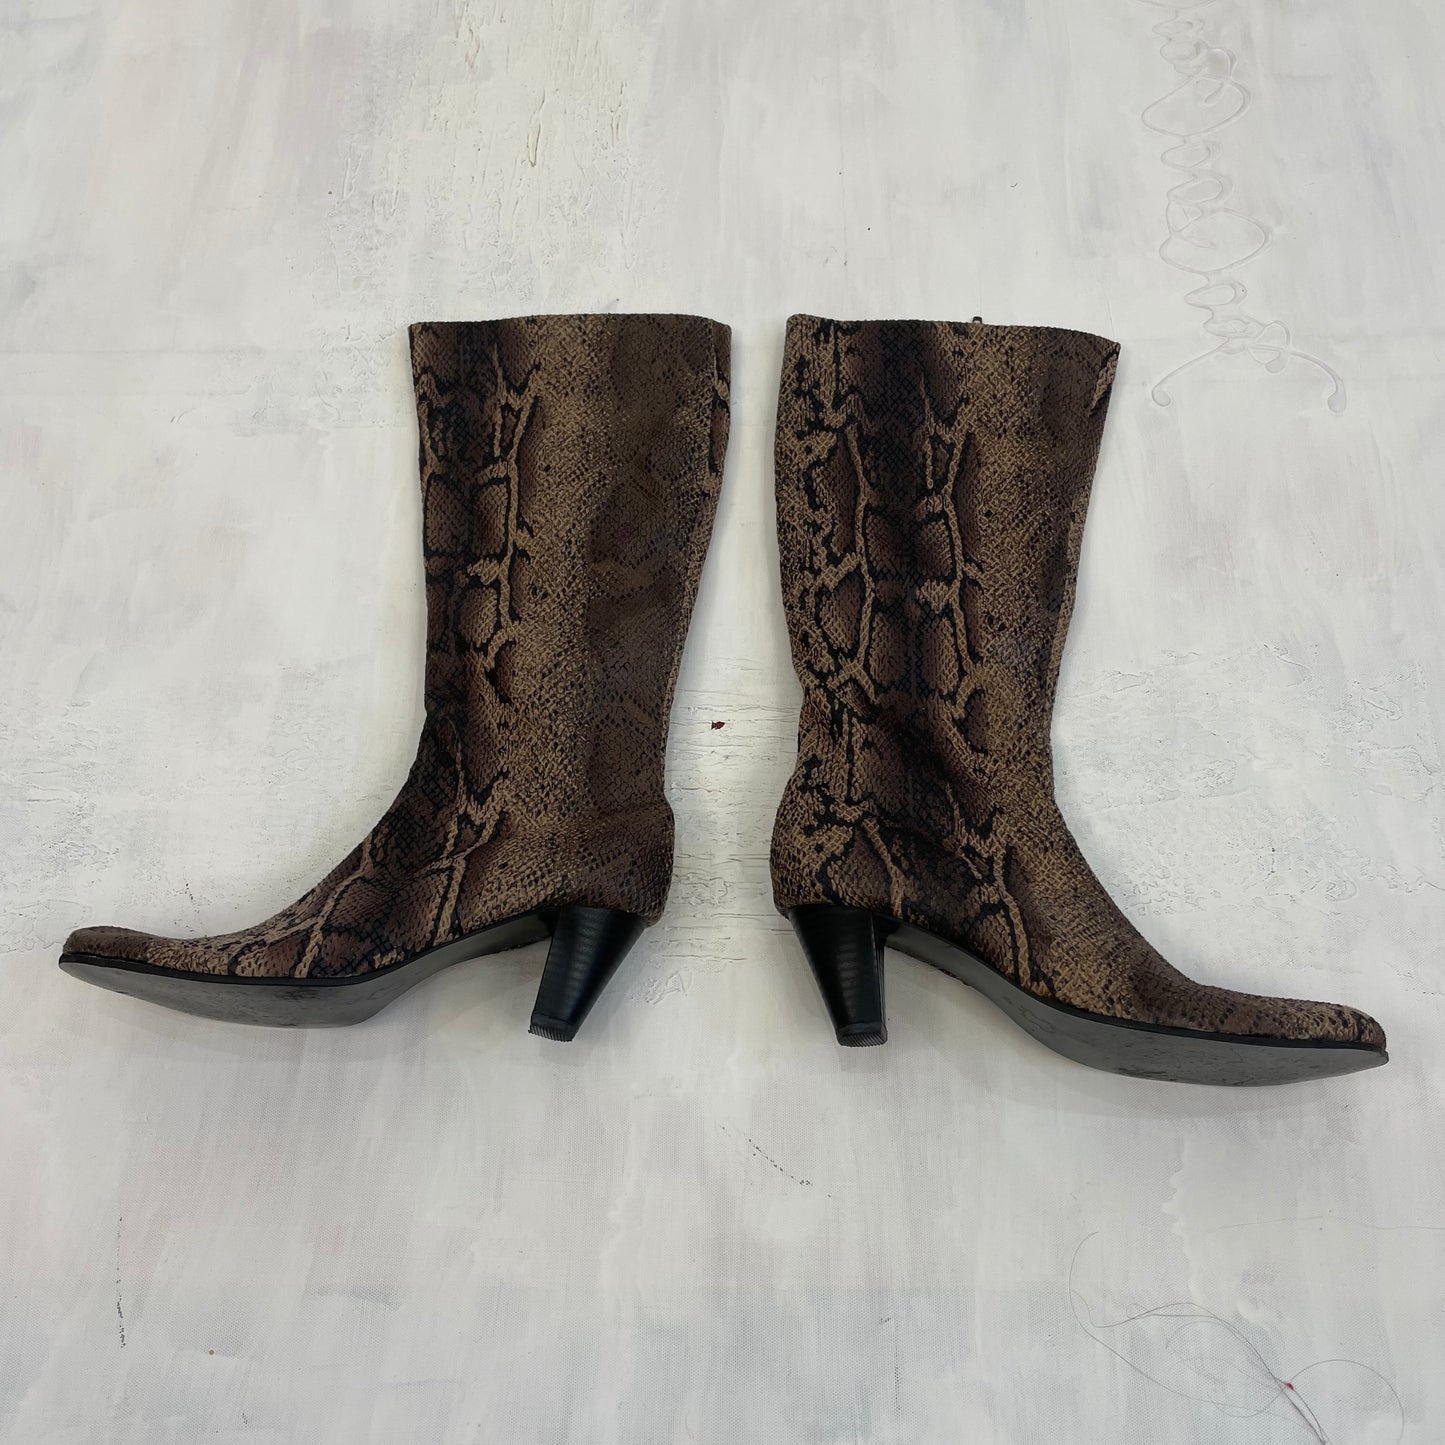 ⭐️ GALENTINES DAY DROP | UK size 8 brown snakeskin heeled boots